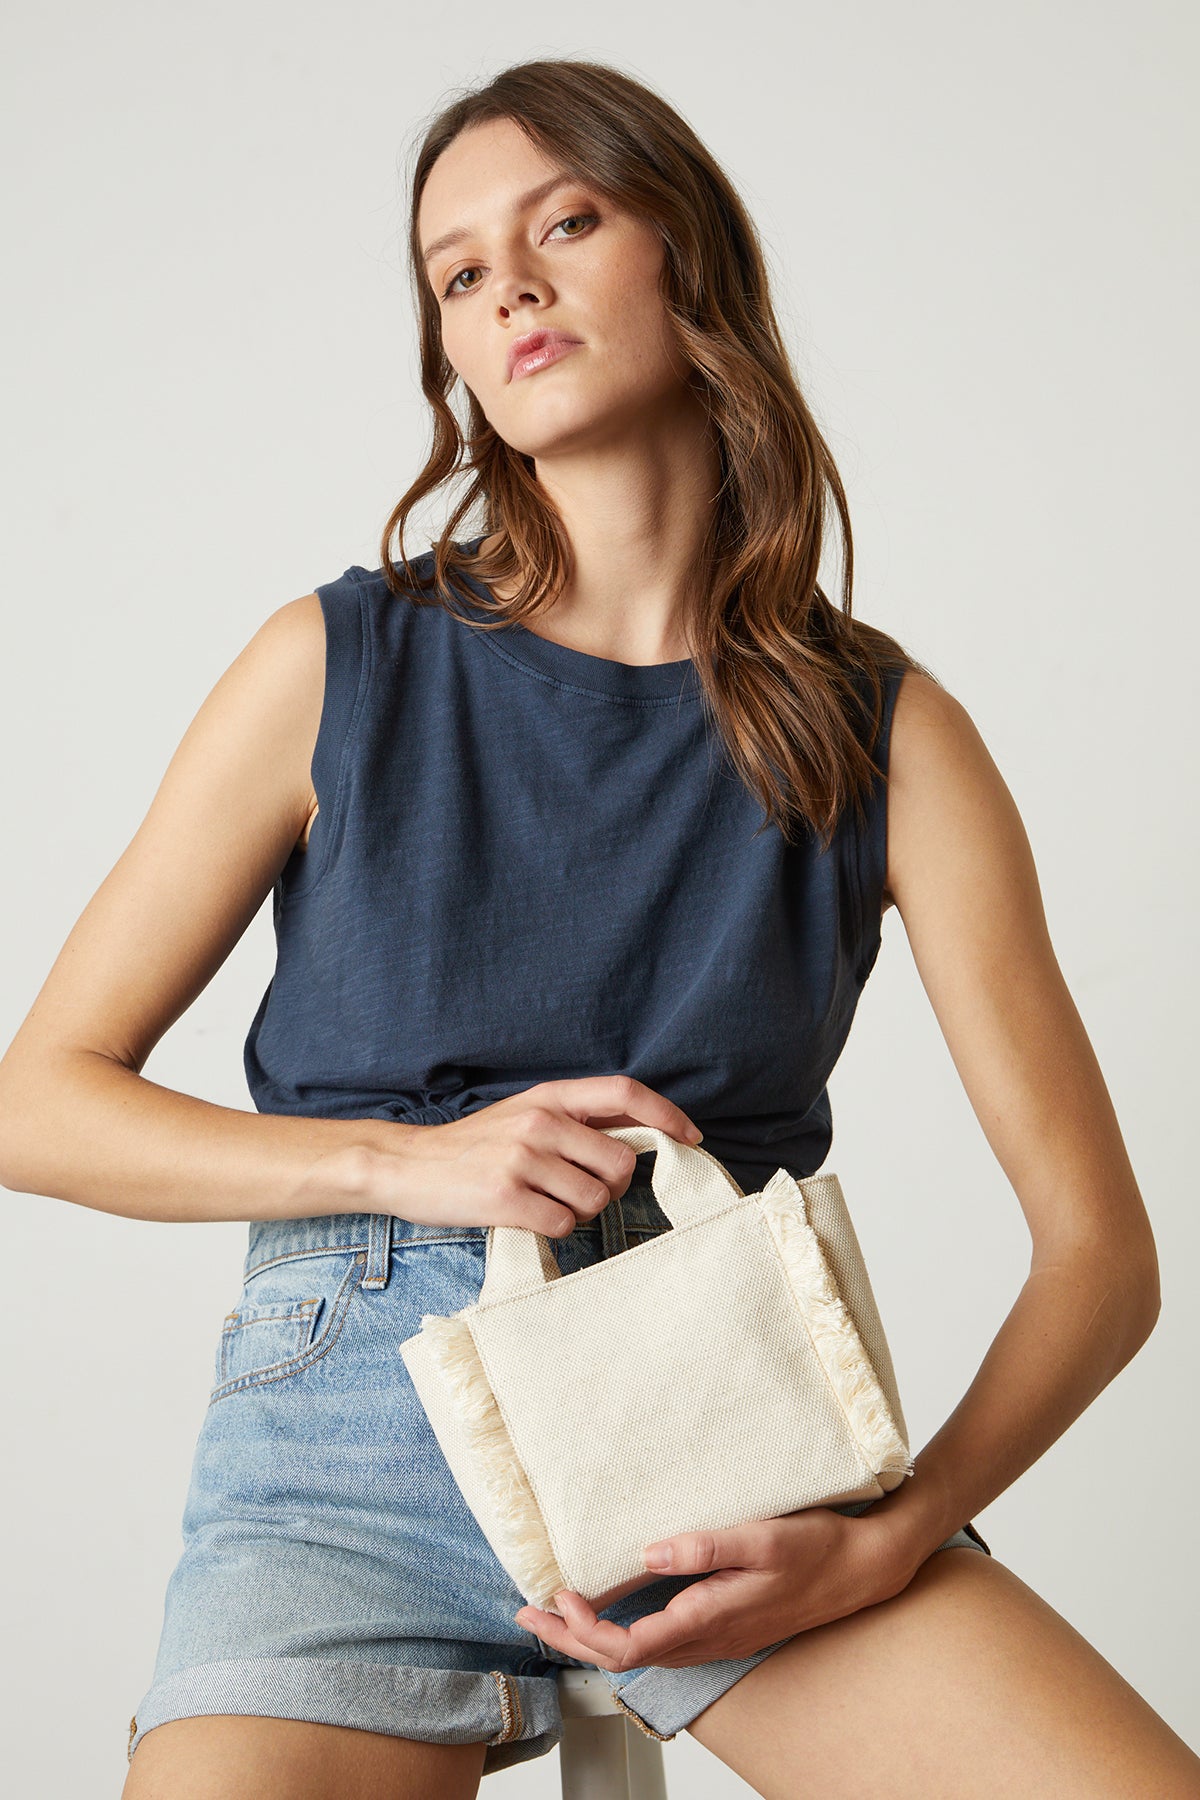 Mini Launch canvas tote in natural with model wearing navy tank and denim shorts-24659129237697